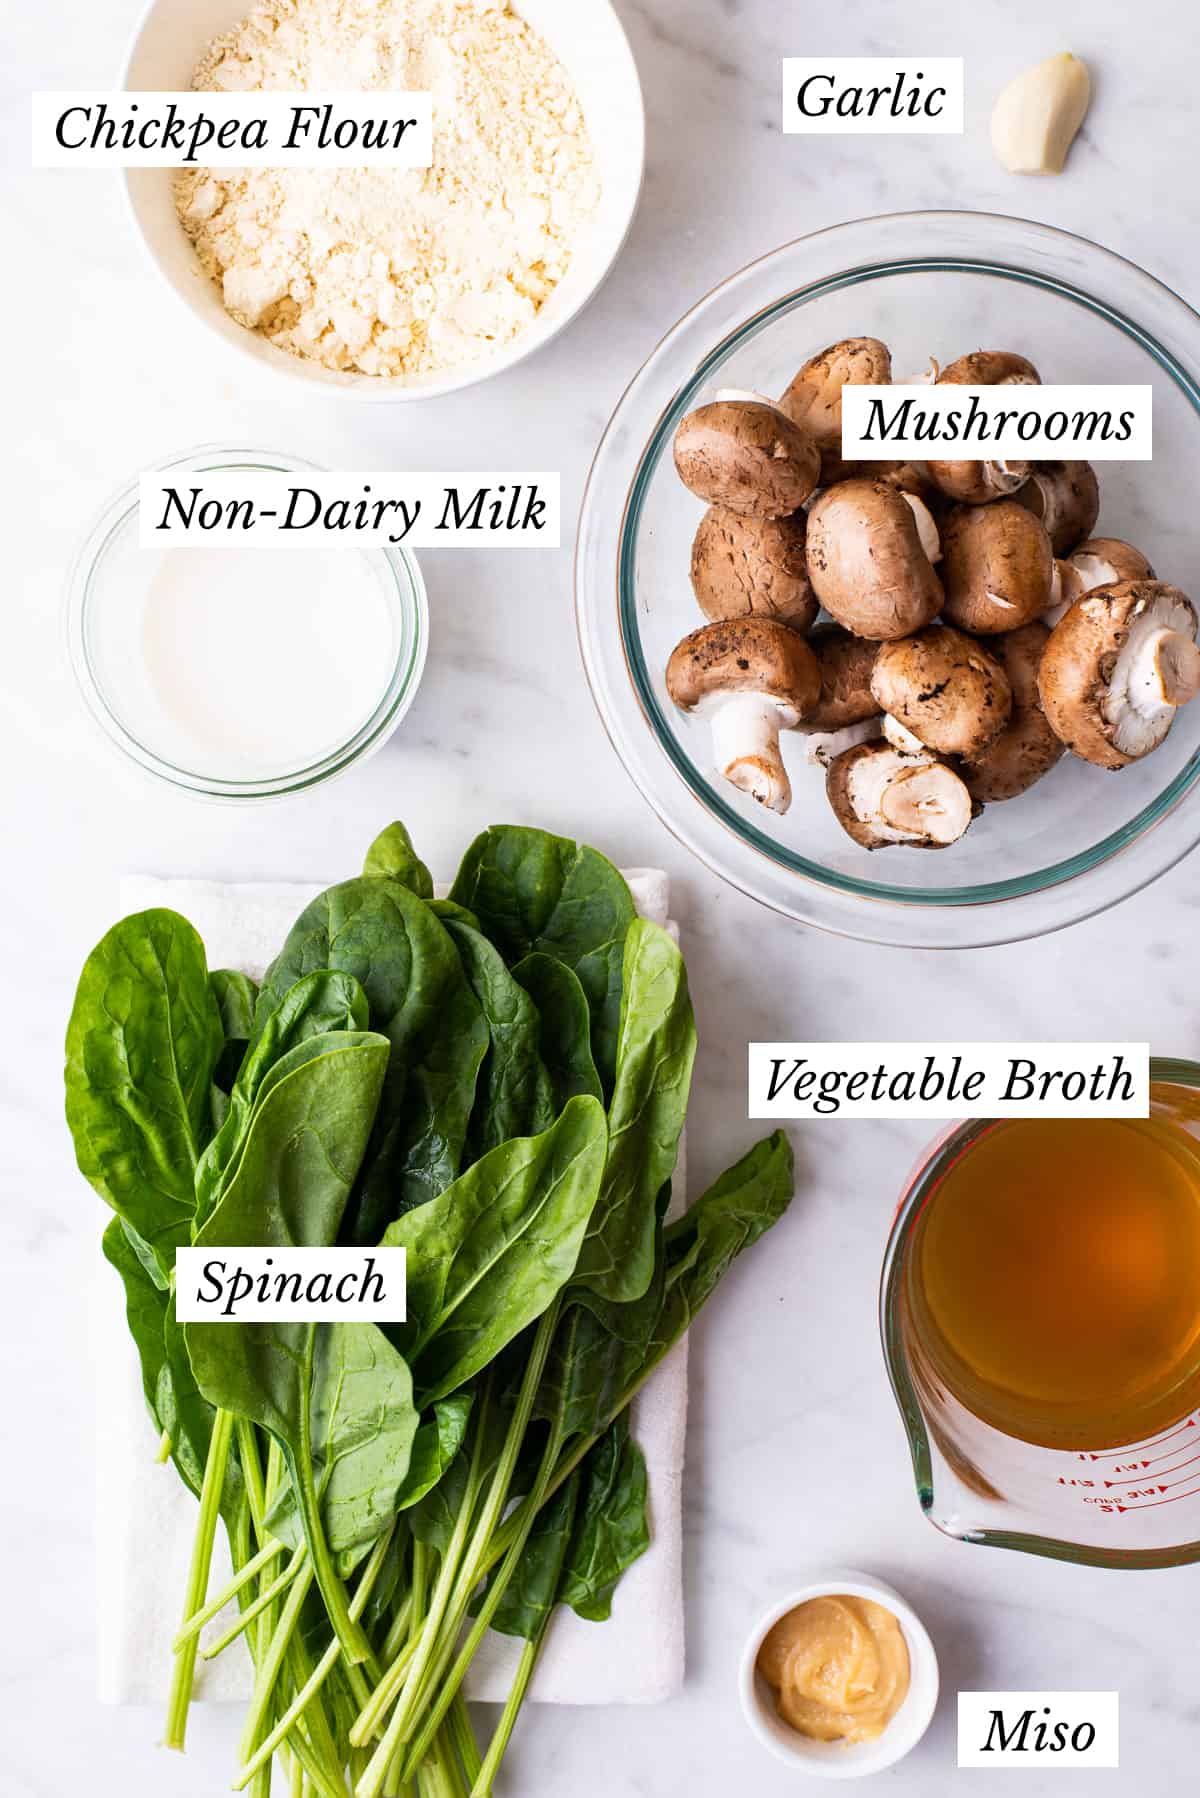 Ingredients gathered to make chickpea crepes with spinach-mushroom filling.